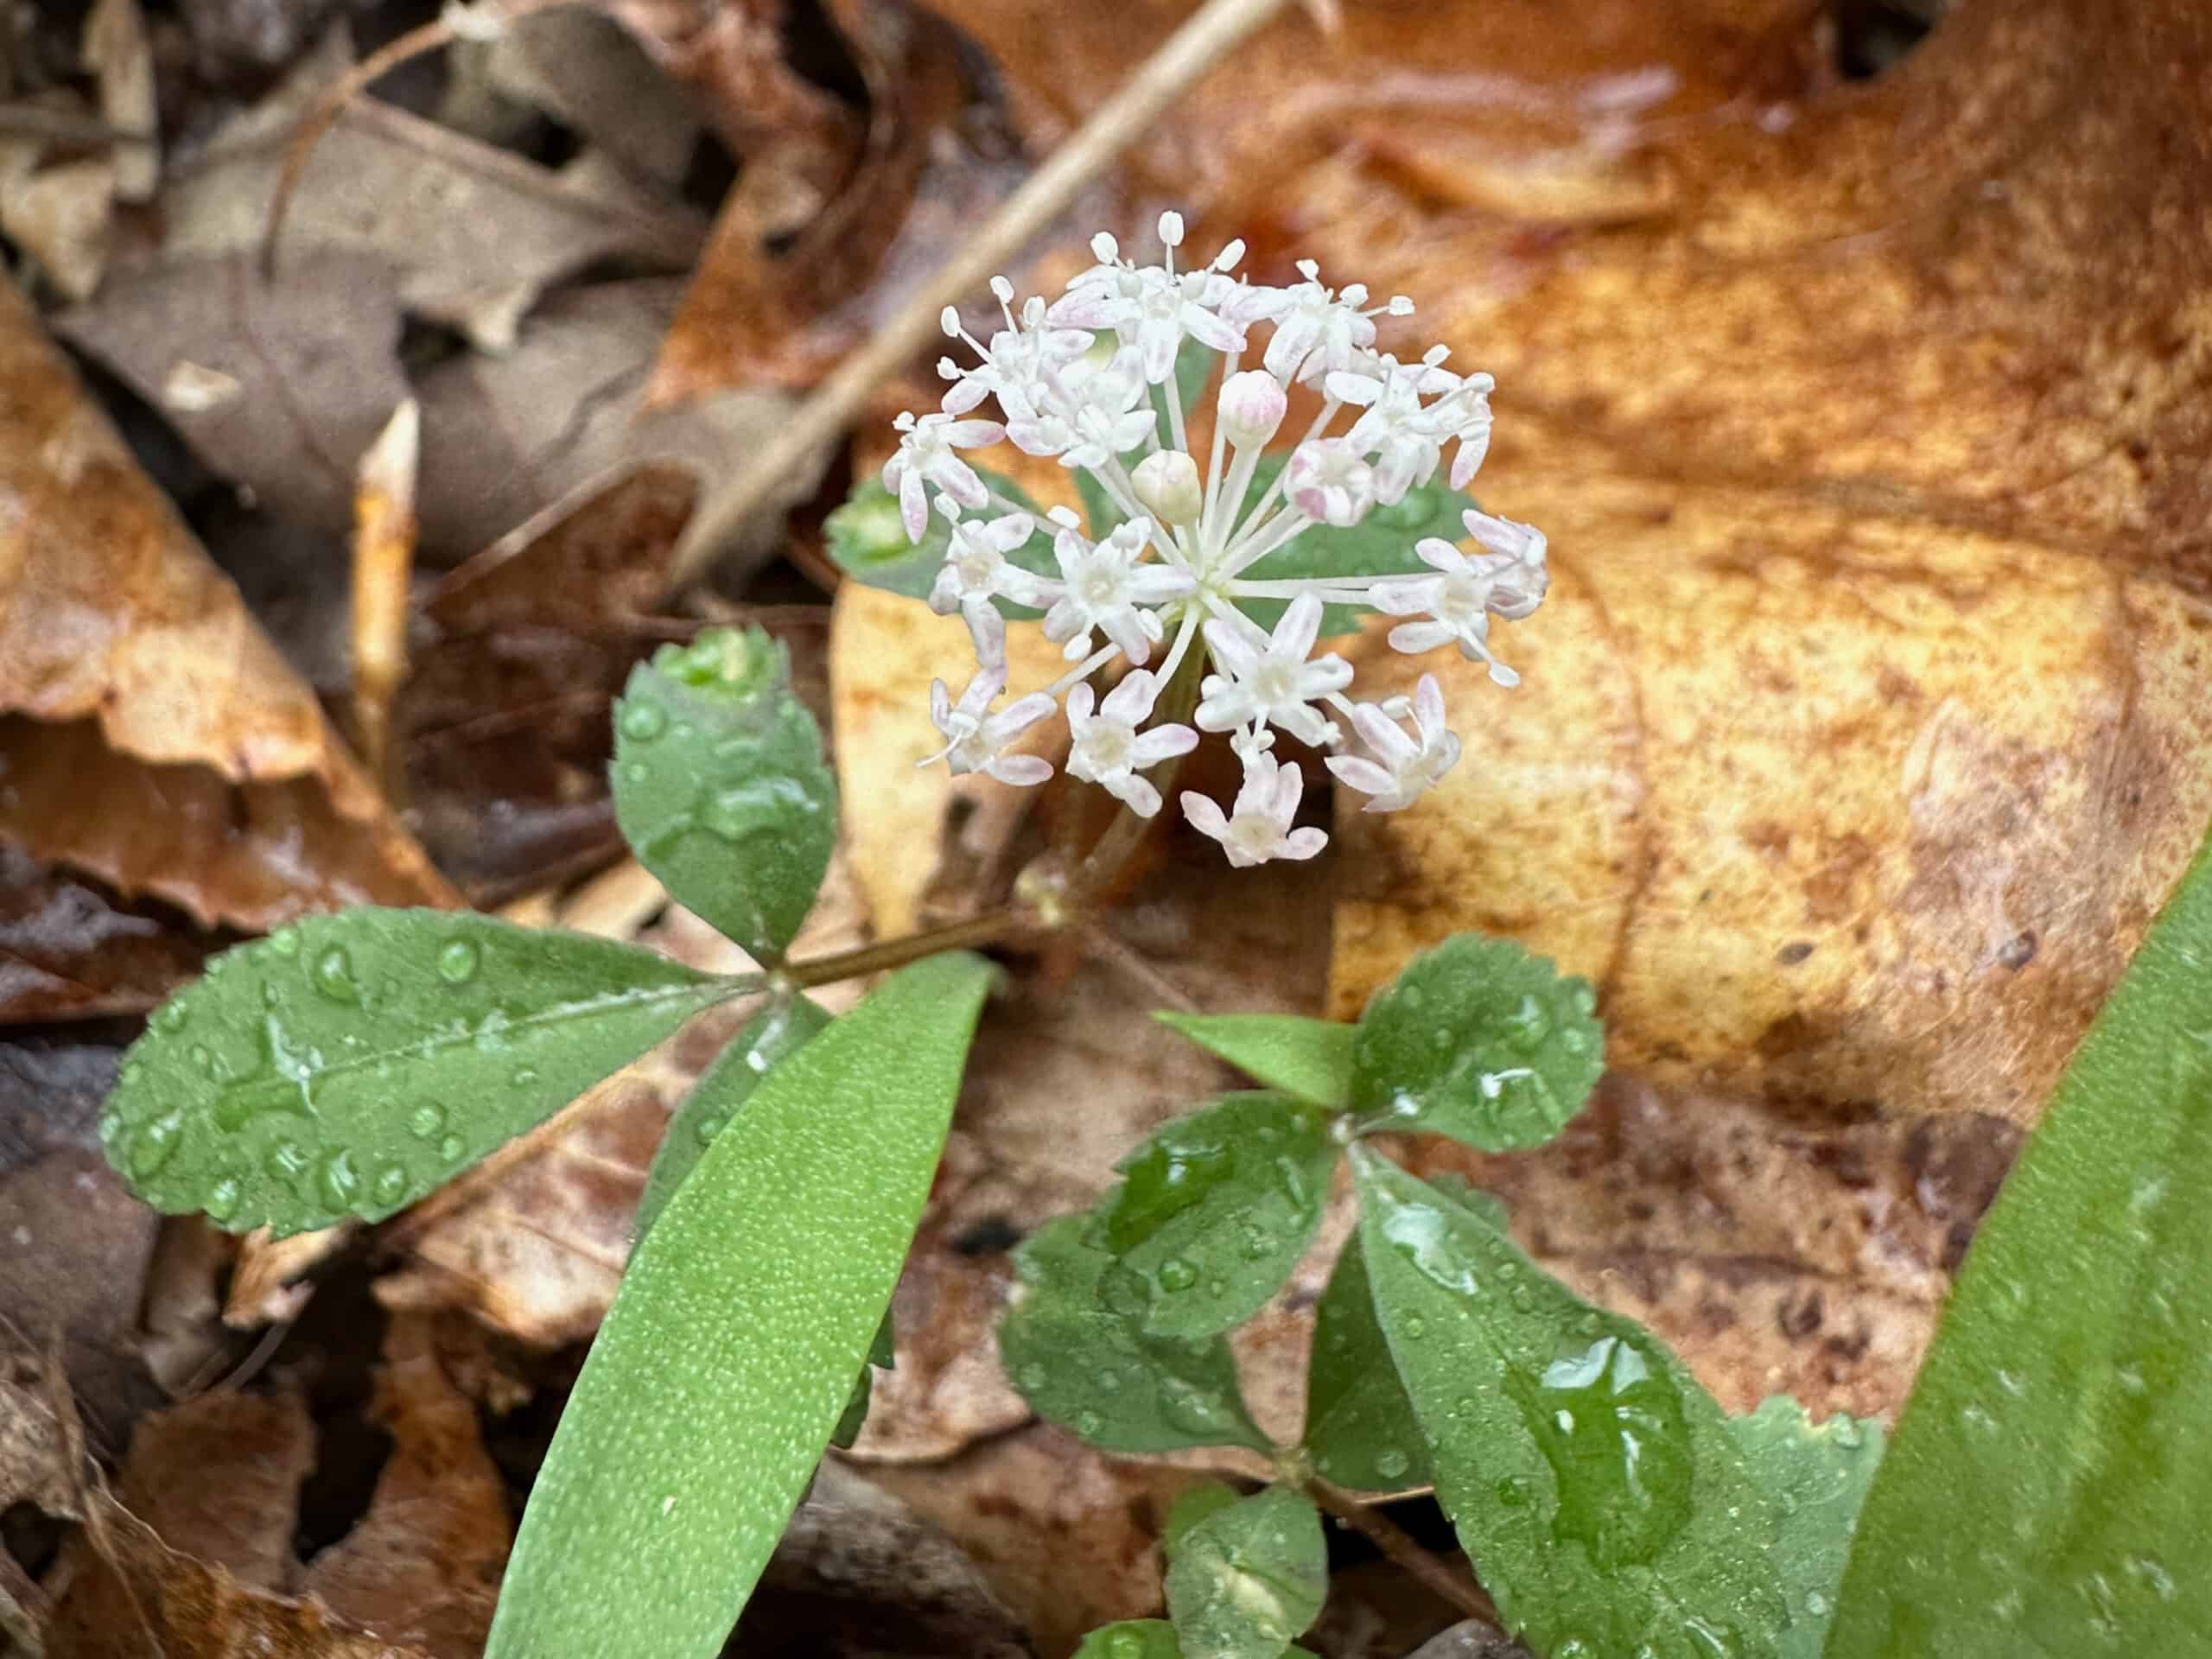 Dwarf ginseng flowers, rounded cluster of tiny white flowers